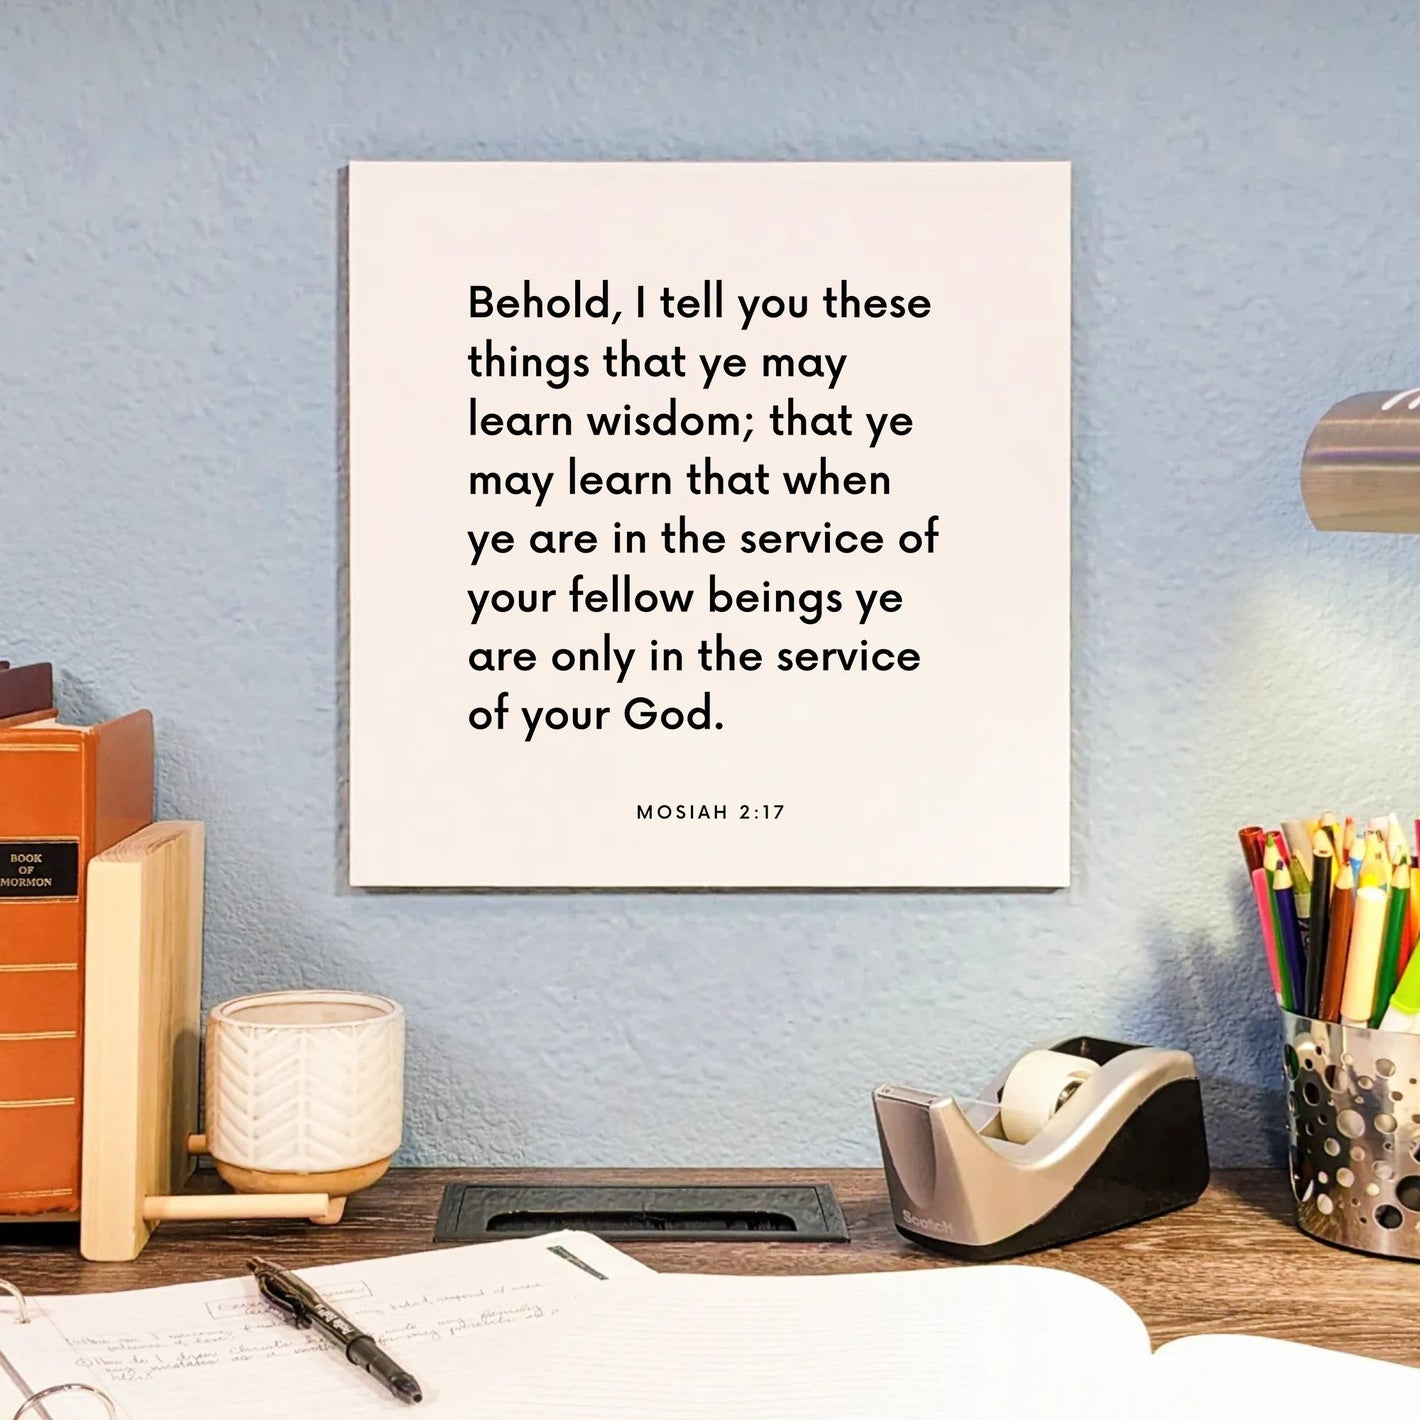 Desk mouting of the scripture tile for Mosiah 2:17 - "When ye are in the service of your fellow beings"